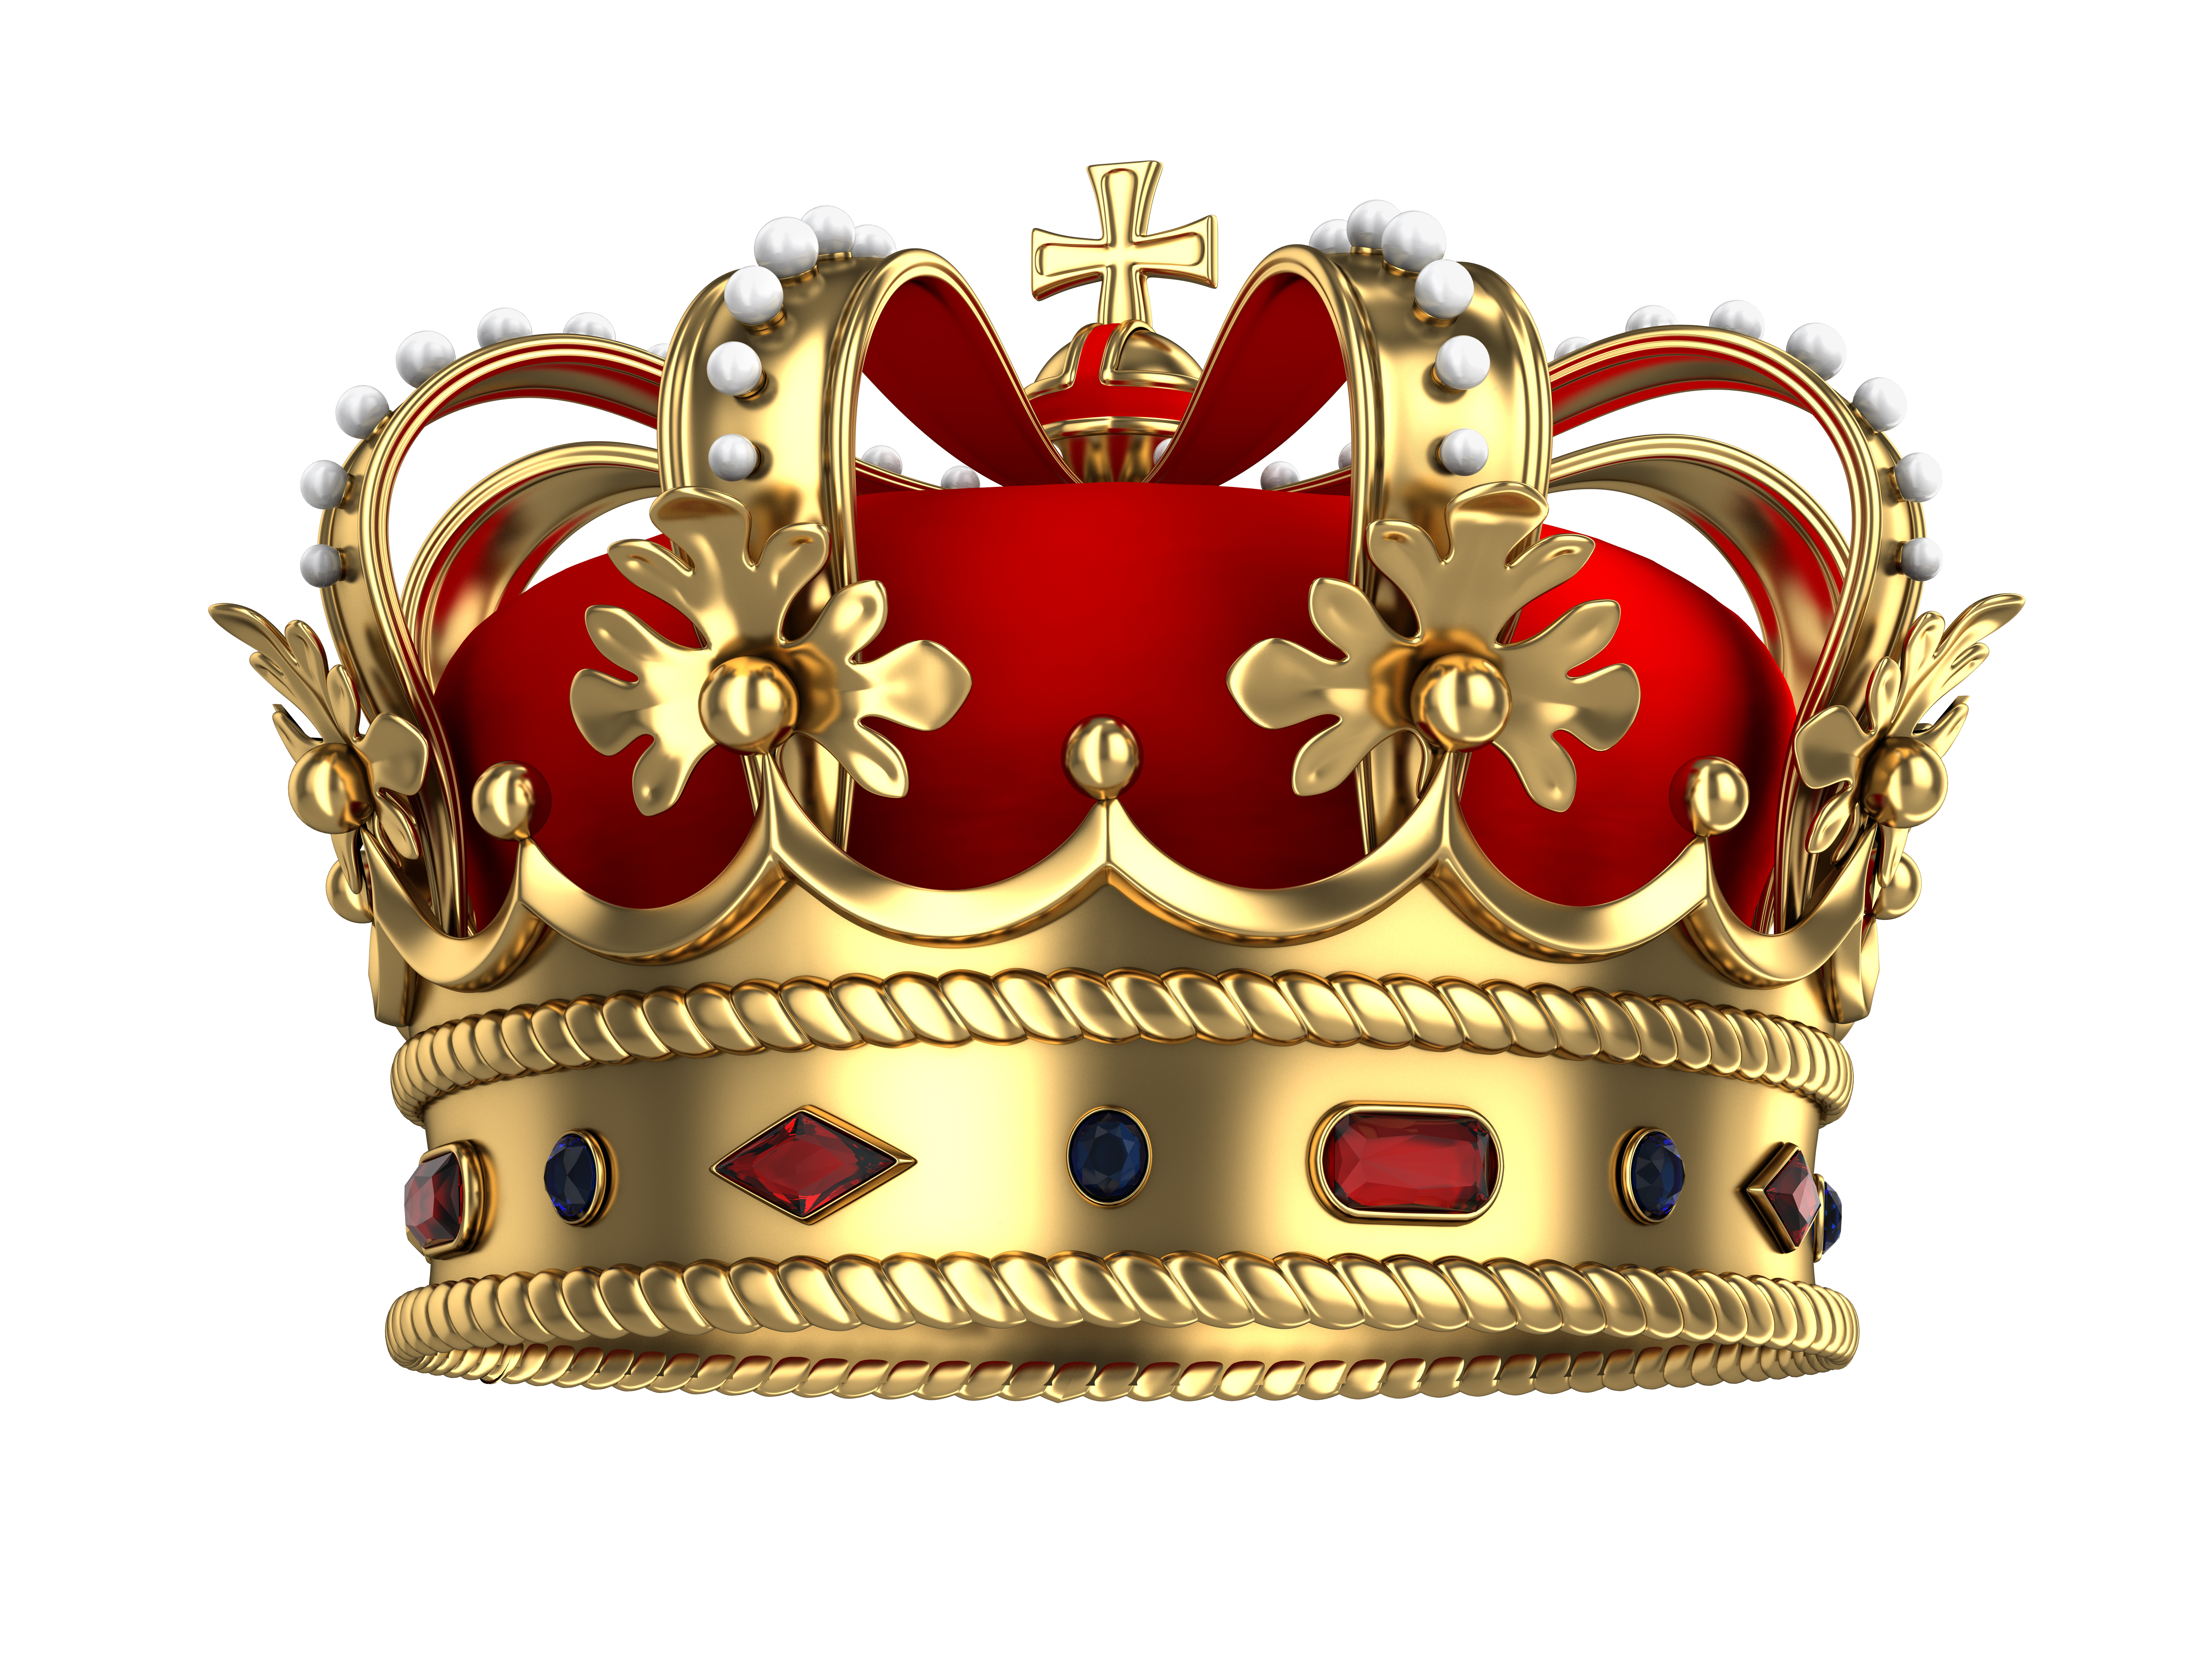 Crown of a king clipart